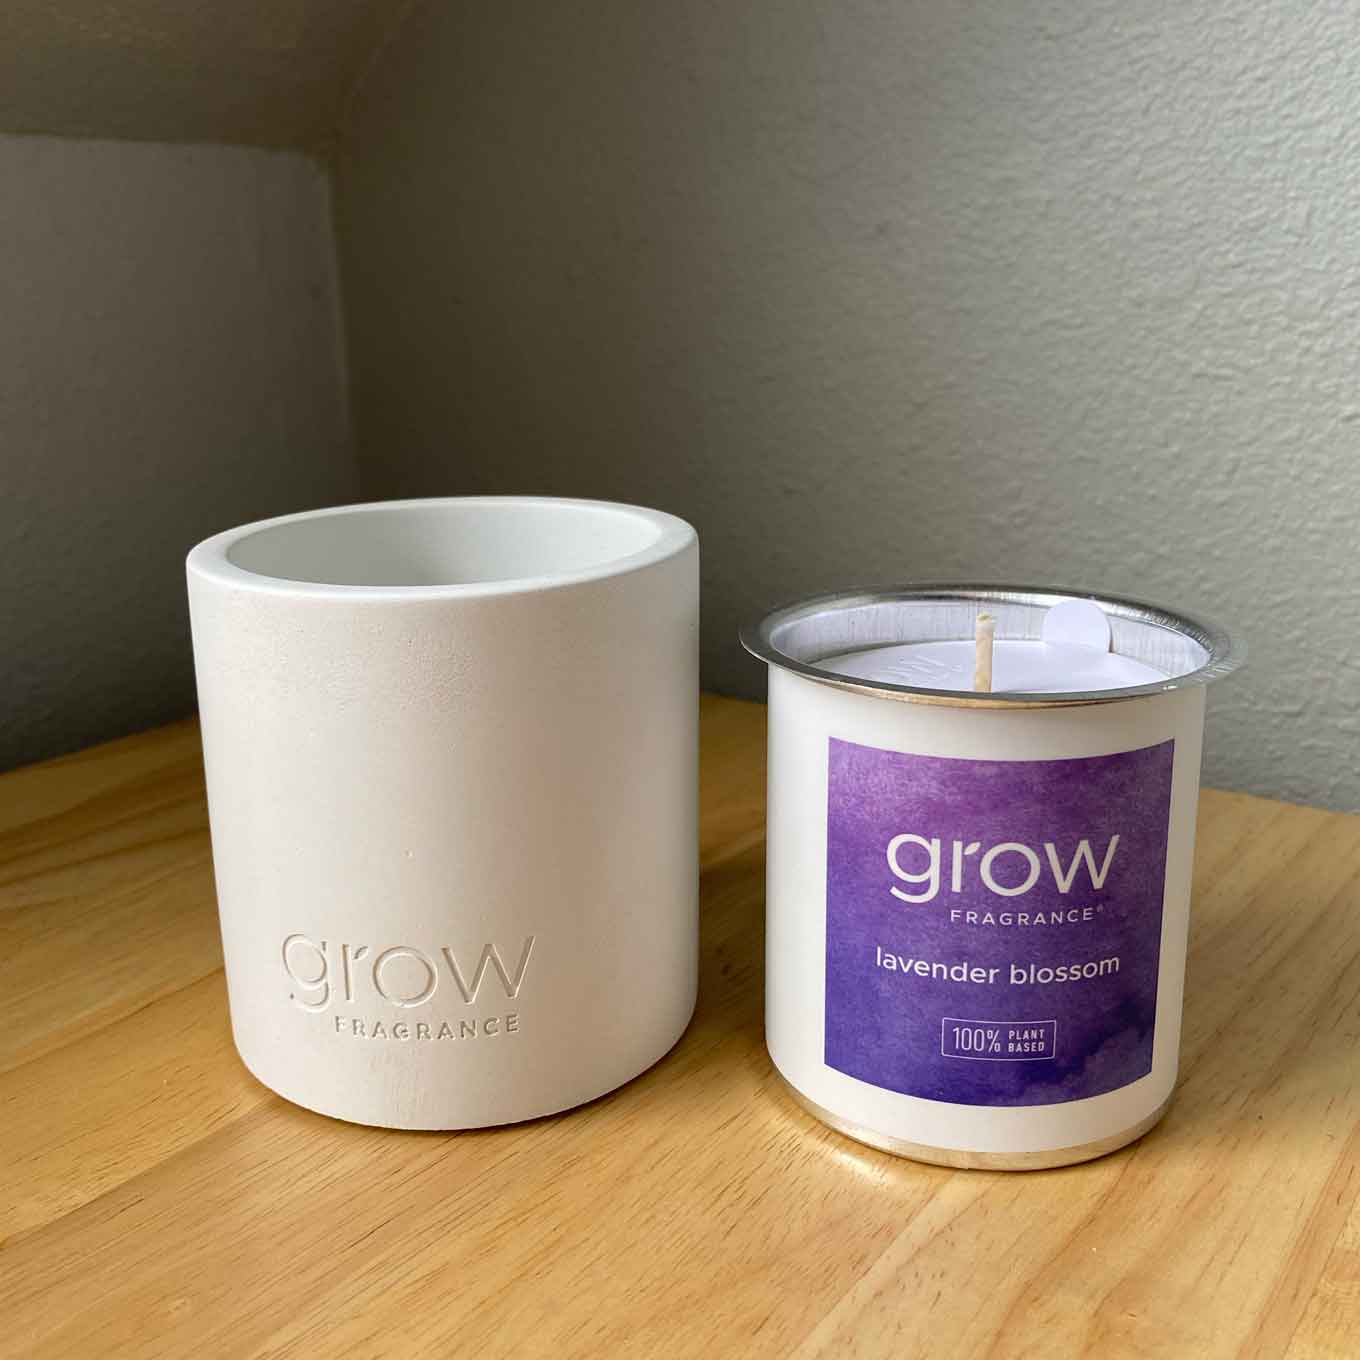 A white concrete vessel, an the aluminum candle insert from Grow Fragrances, with a label that says lavender blossume